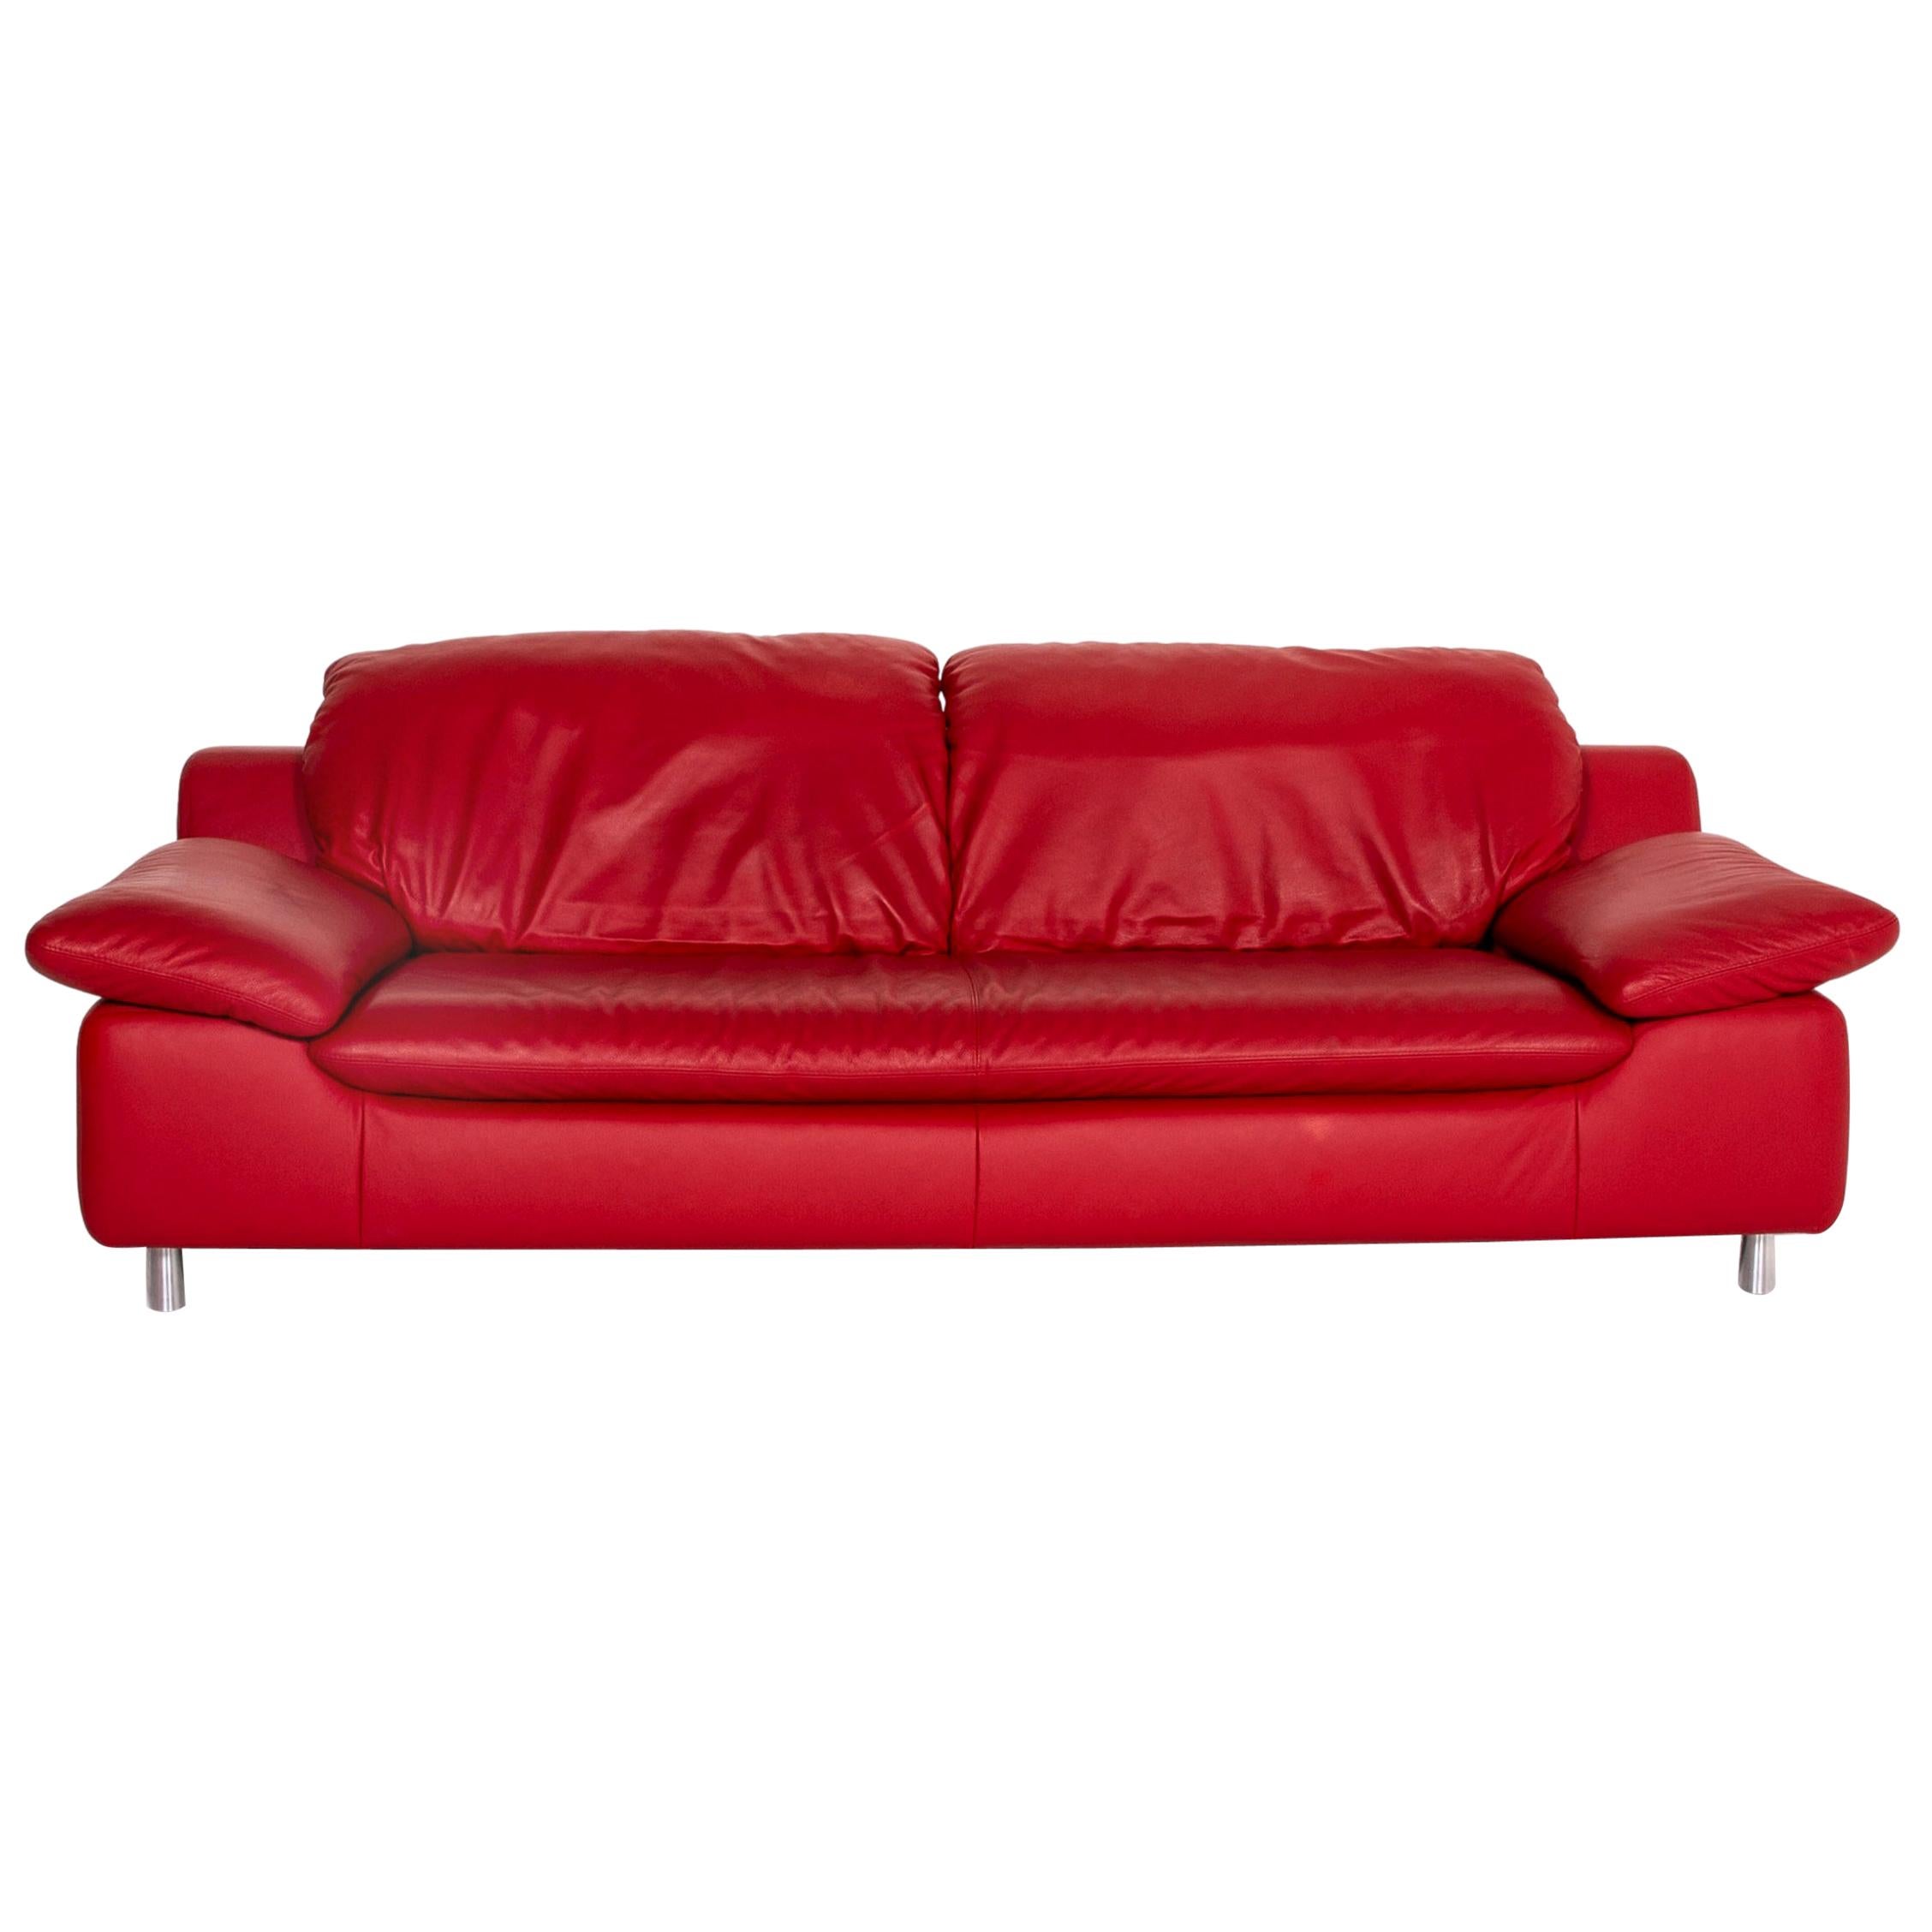 Willi Schillig Leather Sofa Red Three-Seat Function Couch For Sale